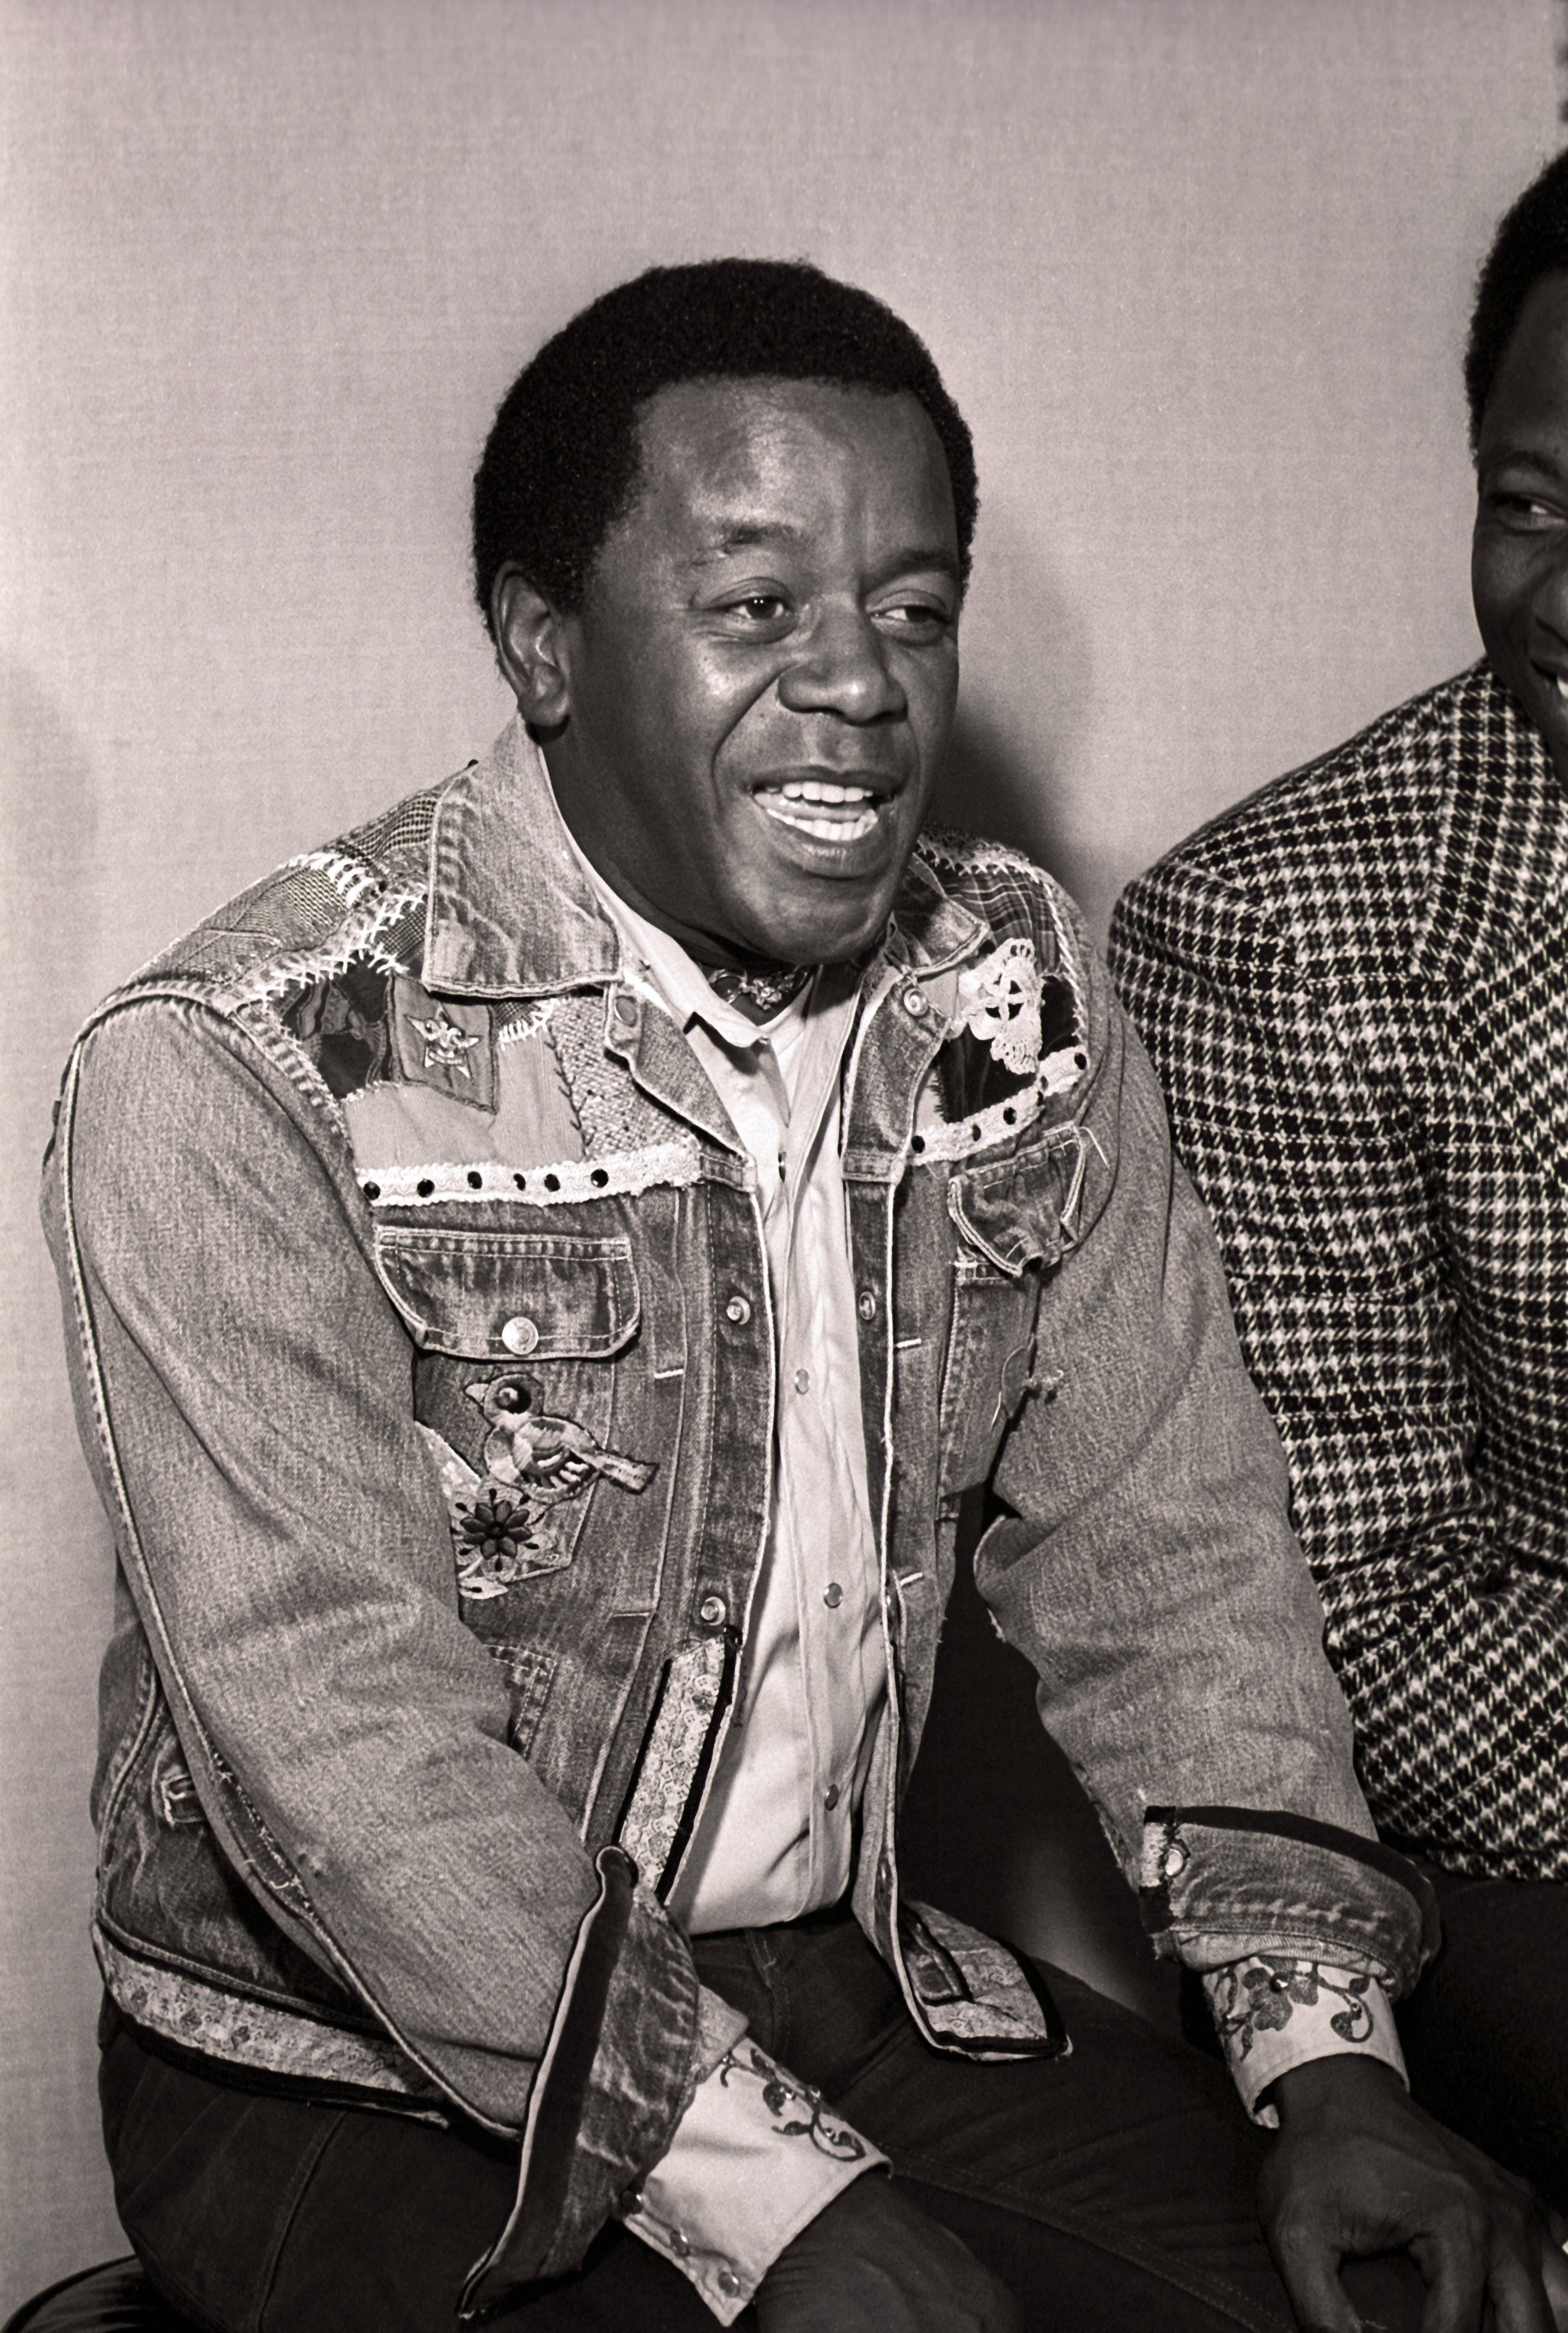  Flip Wilson talks during a press conference before filming NBC-TV's "The Flip Wilson Show" while sitting next to Hank Aaron on October 15, 1973 | Photo: Getty Images